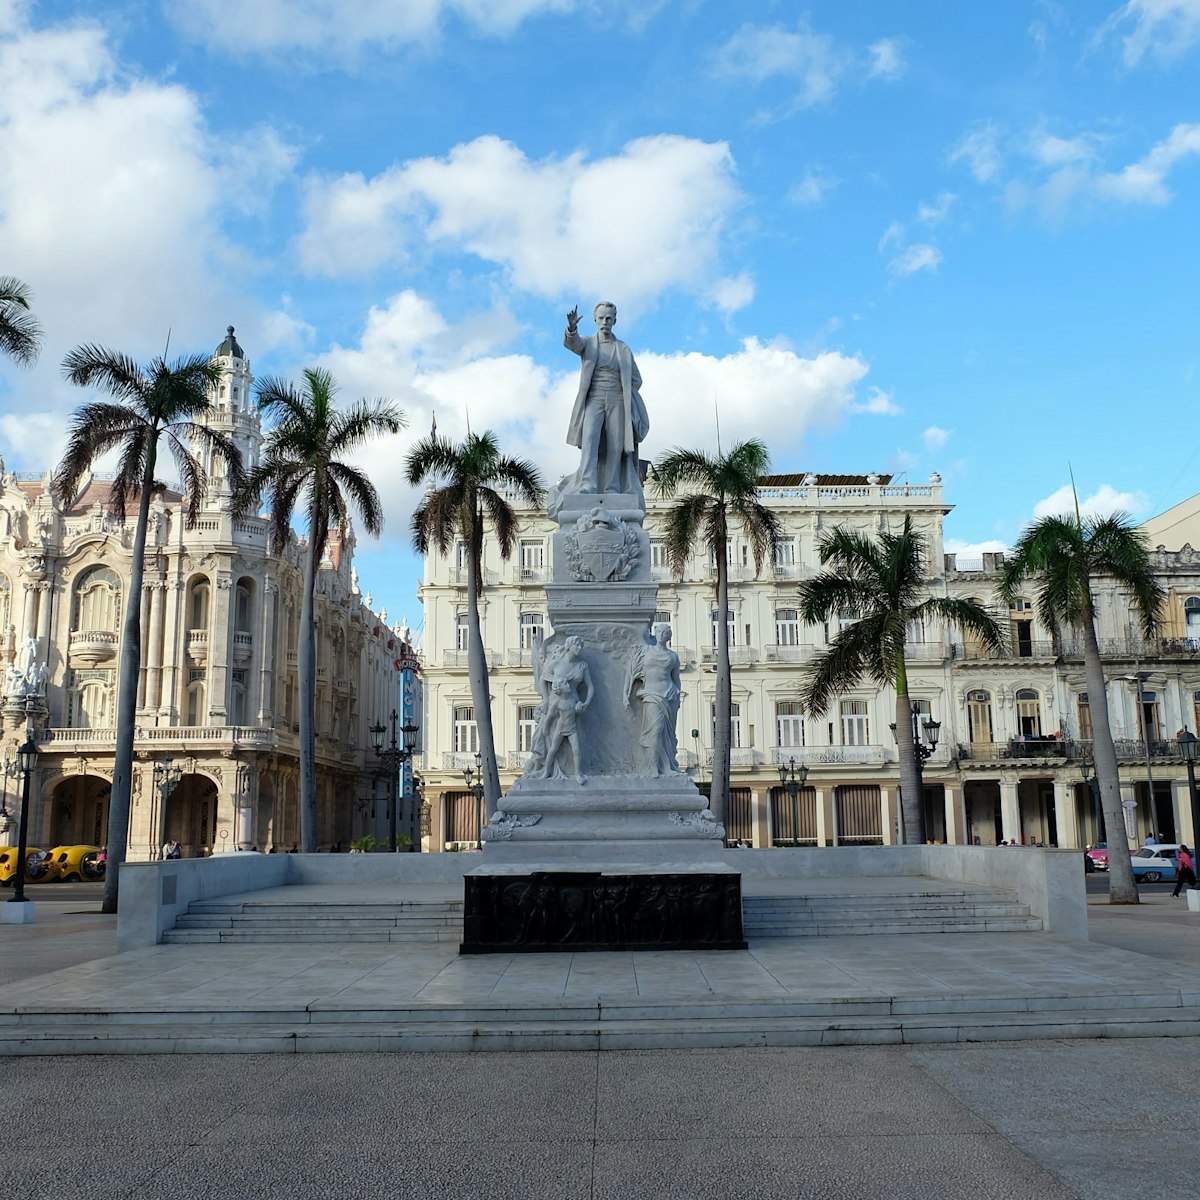 A statue of Cuba’s National Heroe José Martí in the center of the Parque Central.